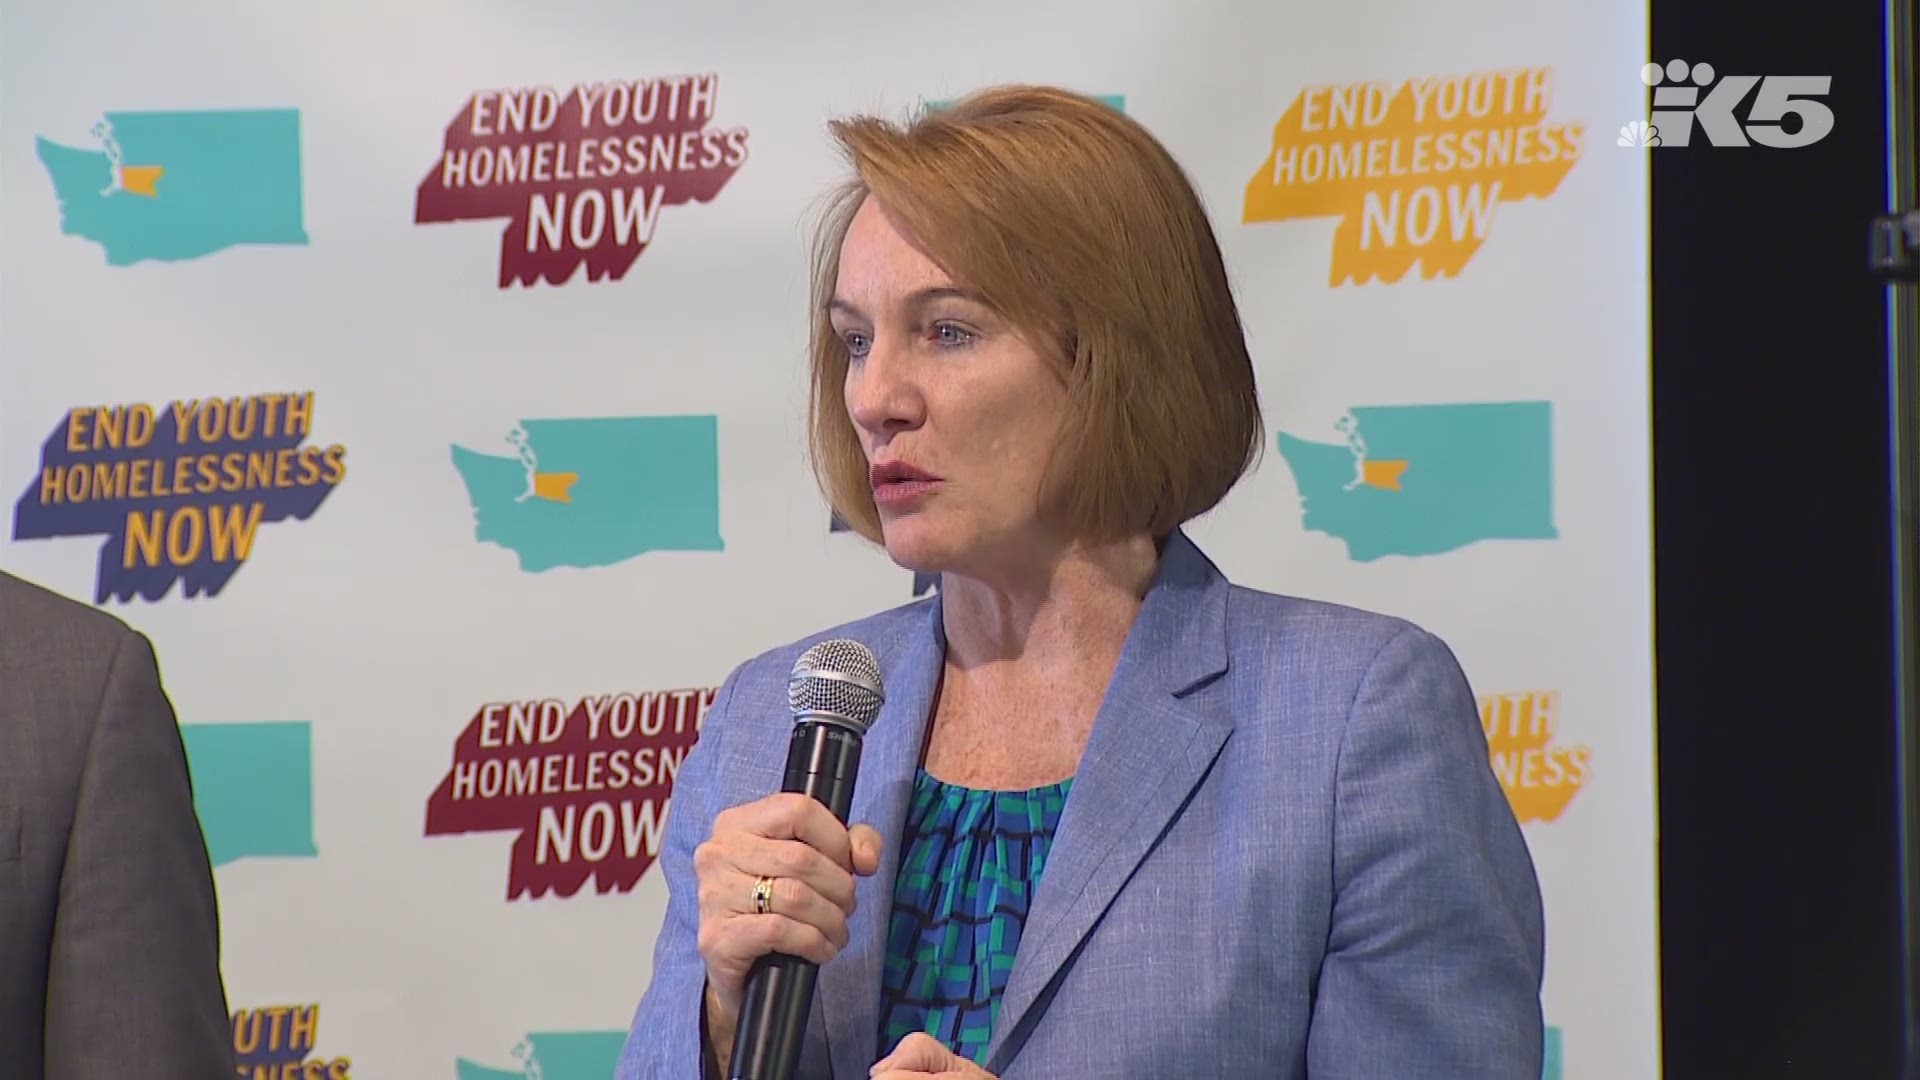 Seattle Mayor Jenny Durkan speaks at an event promoting strides made in ending youth homelessness on June 25, 2019.